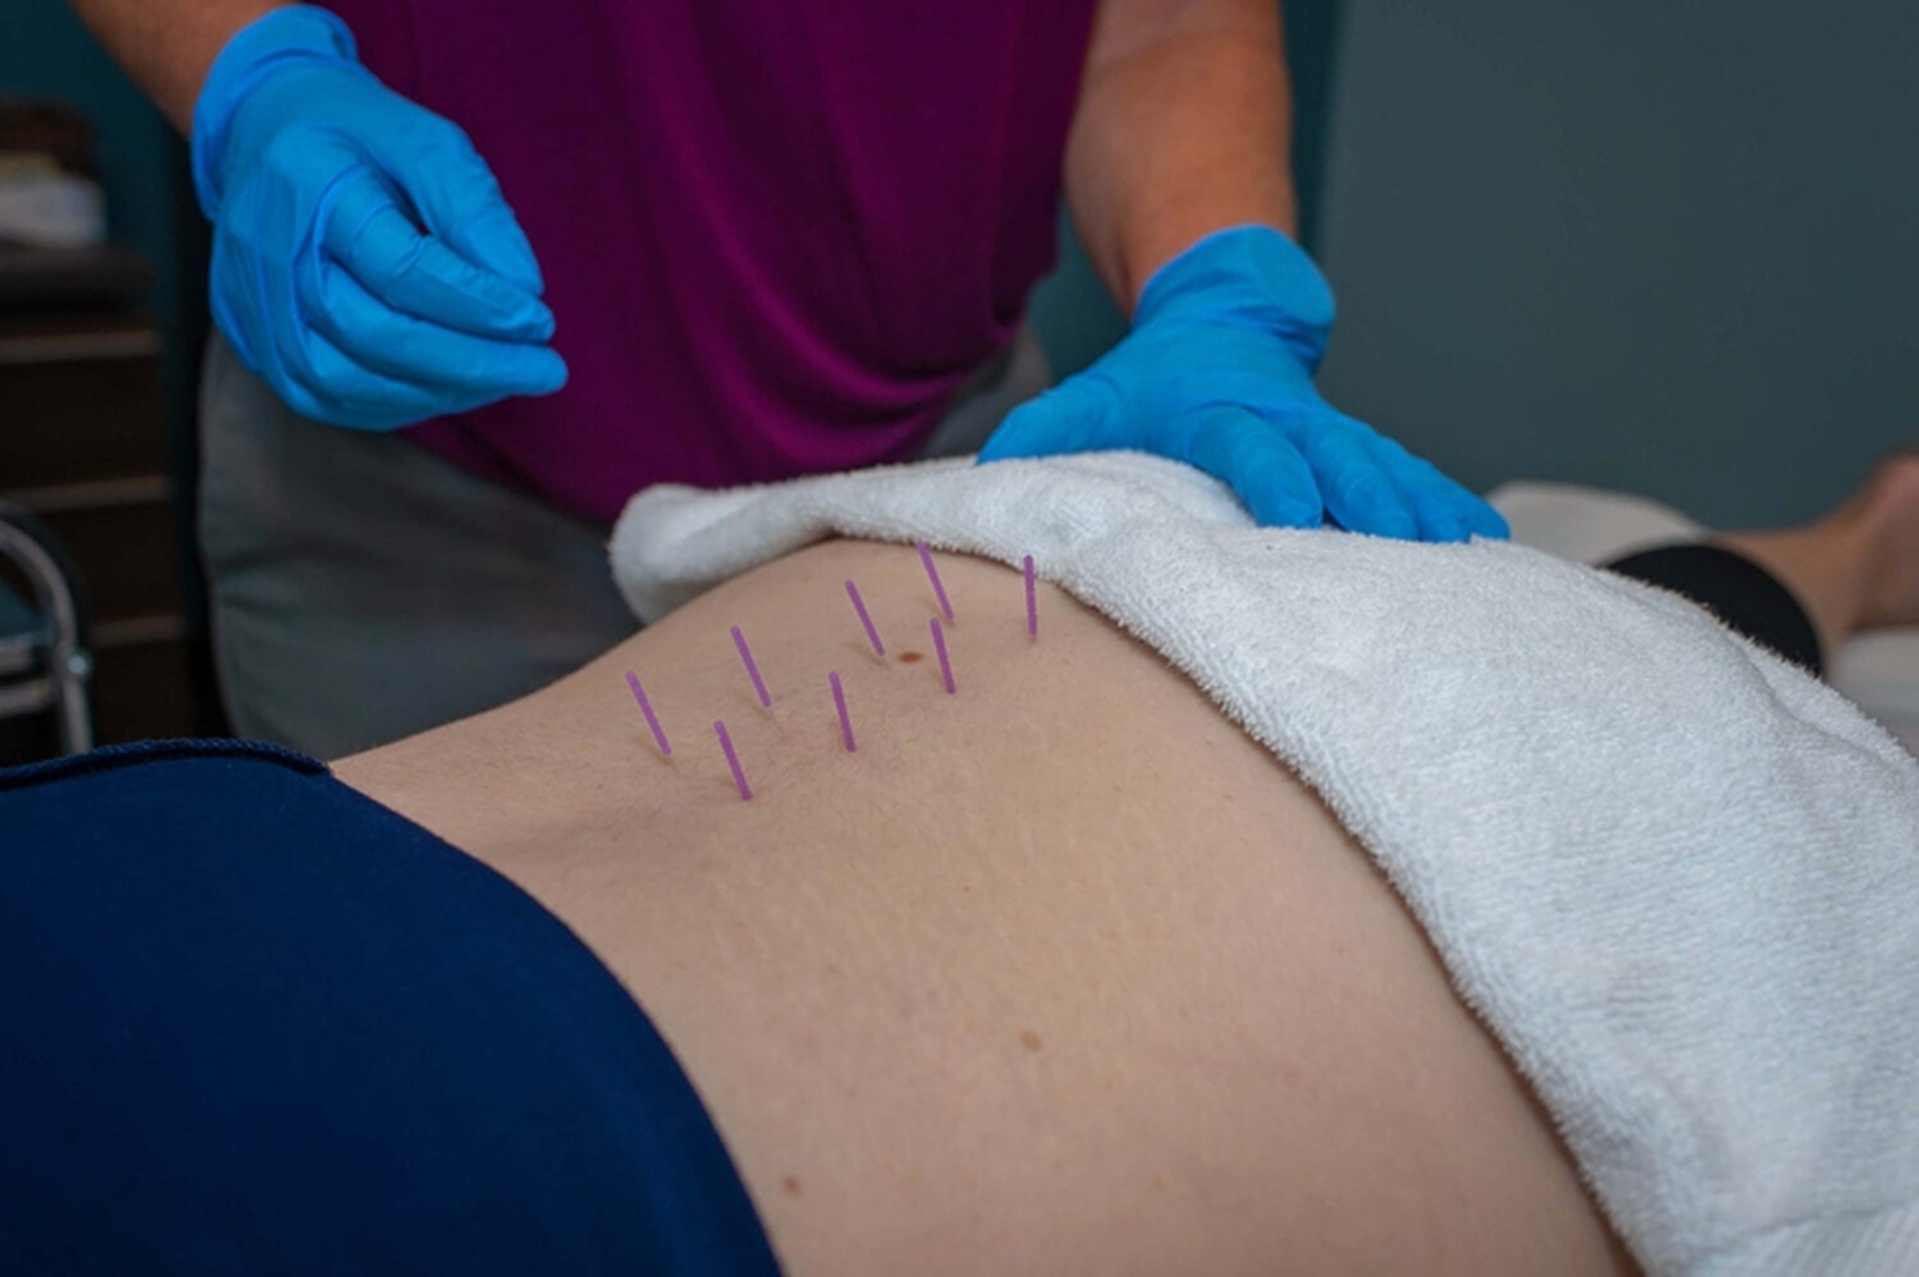 how much does dry needling hurt it depends on the level of pain